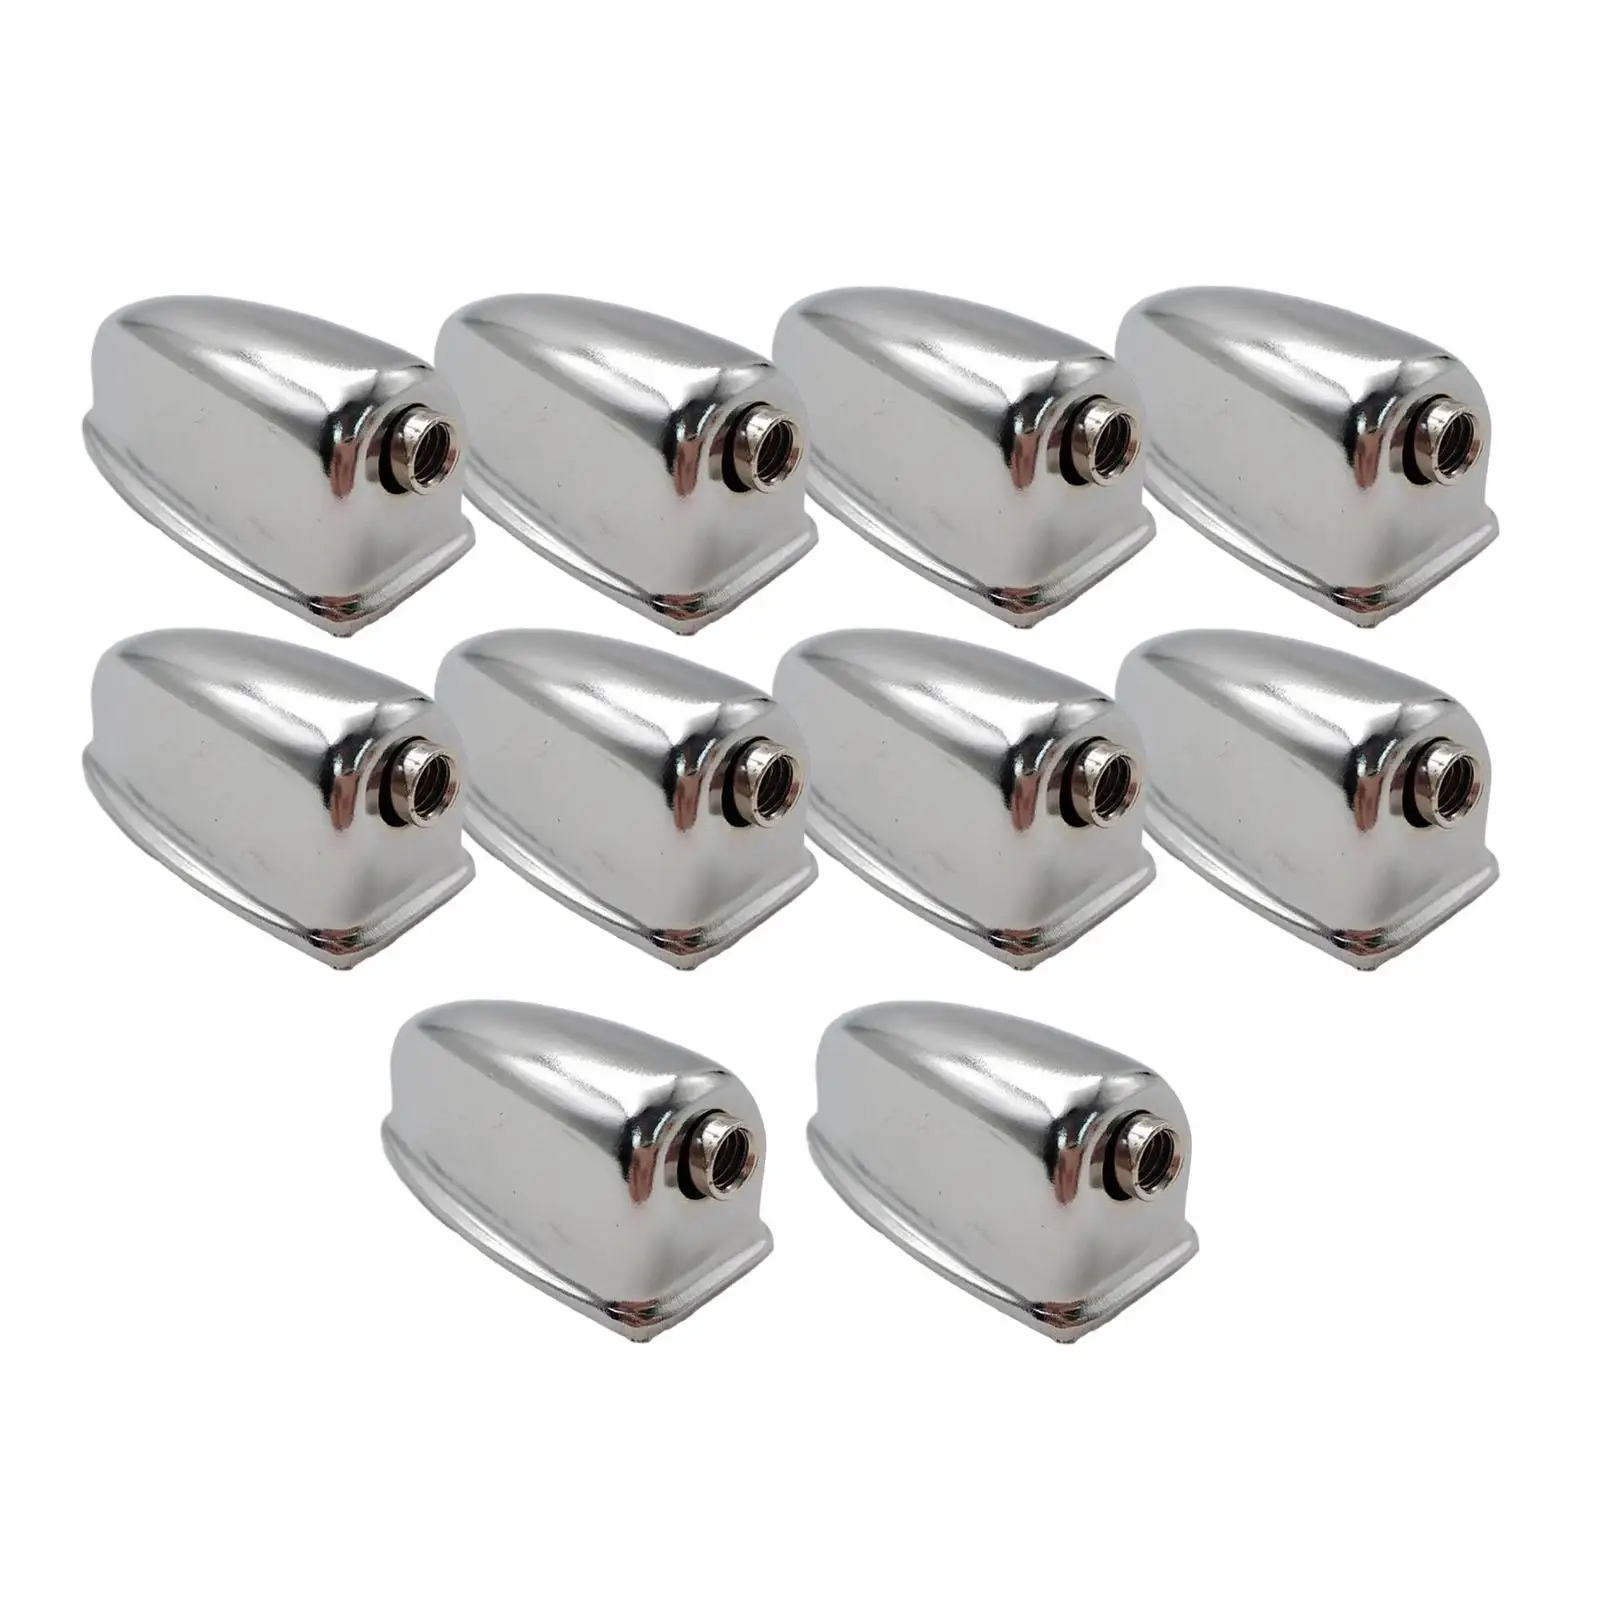 10 Pieces Snare Drum Lug Accessories Metal Lugs Snare Drum Parts for Drum Kits Snare Percussion Musical Instrument Maintenancing